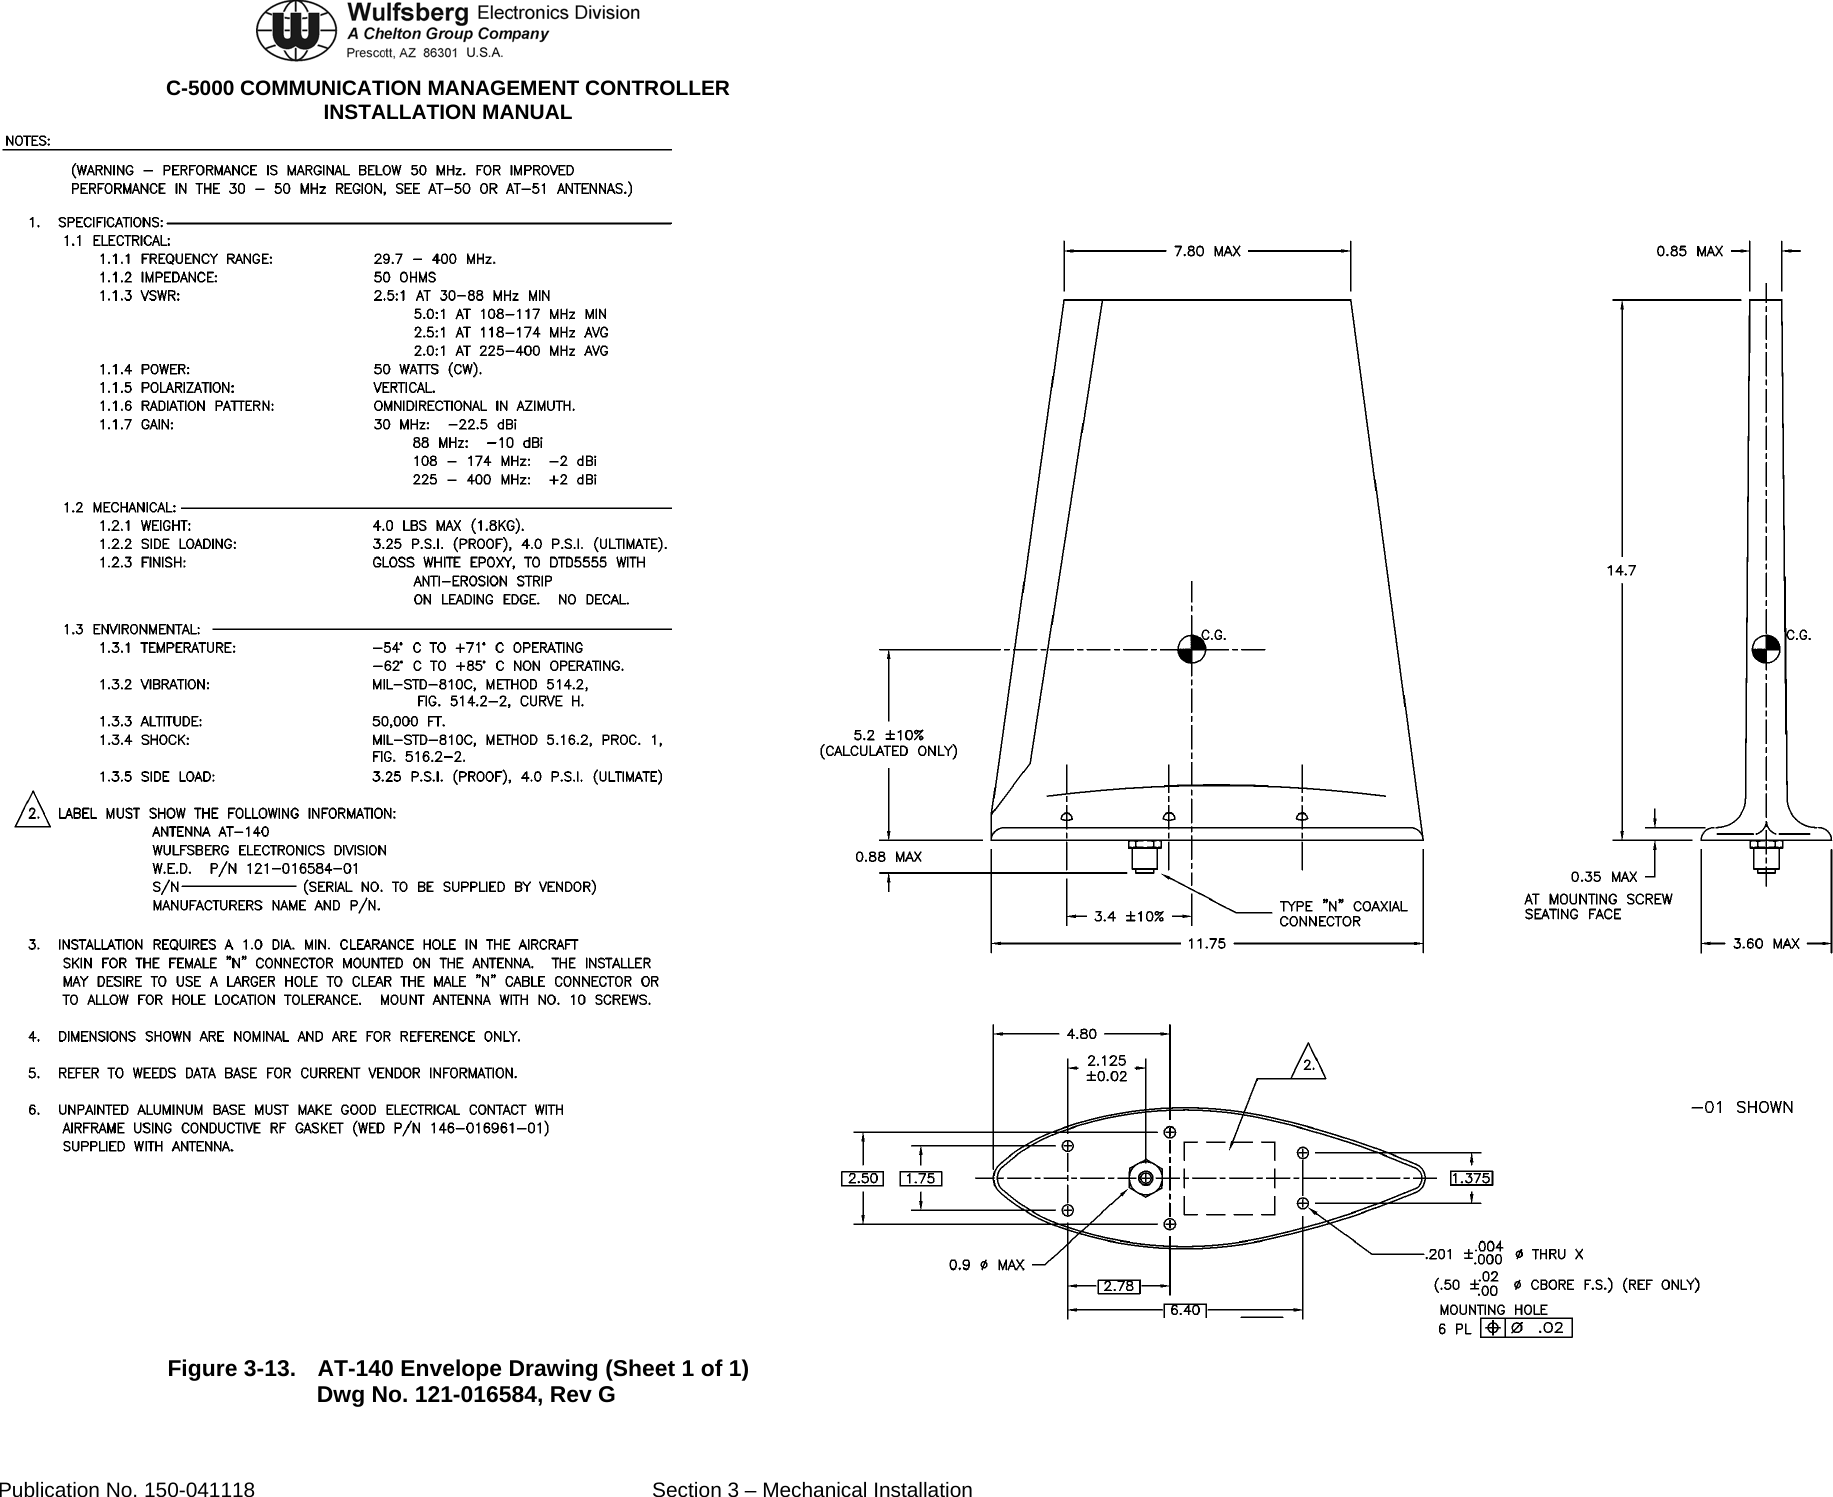  C-5000 COMMUNICATION MANAGEMENT CONTROLLER INSTALLATION MANUAL  Figure 3-13.  AT-140 Envelope Drawing (Sheet 1 of 1) Dwg No. 121-016584, Rev G Publication No. 150-041118  Section 3 – Mechanical Installation 